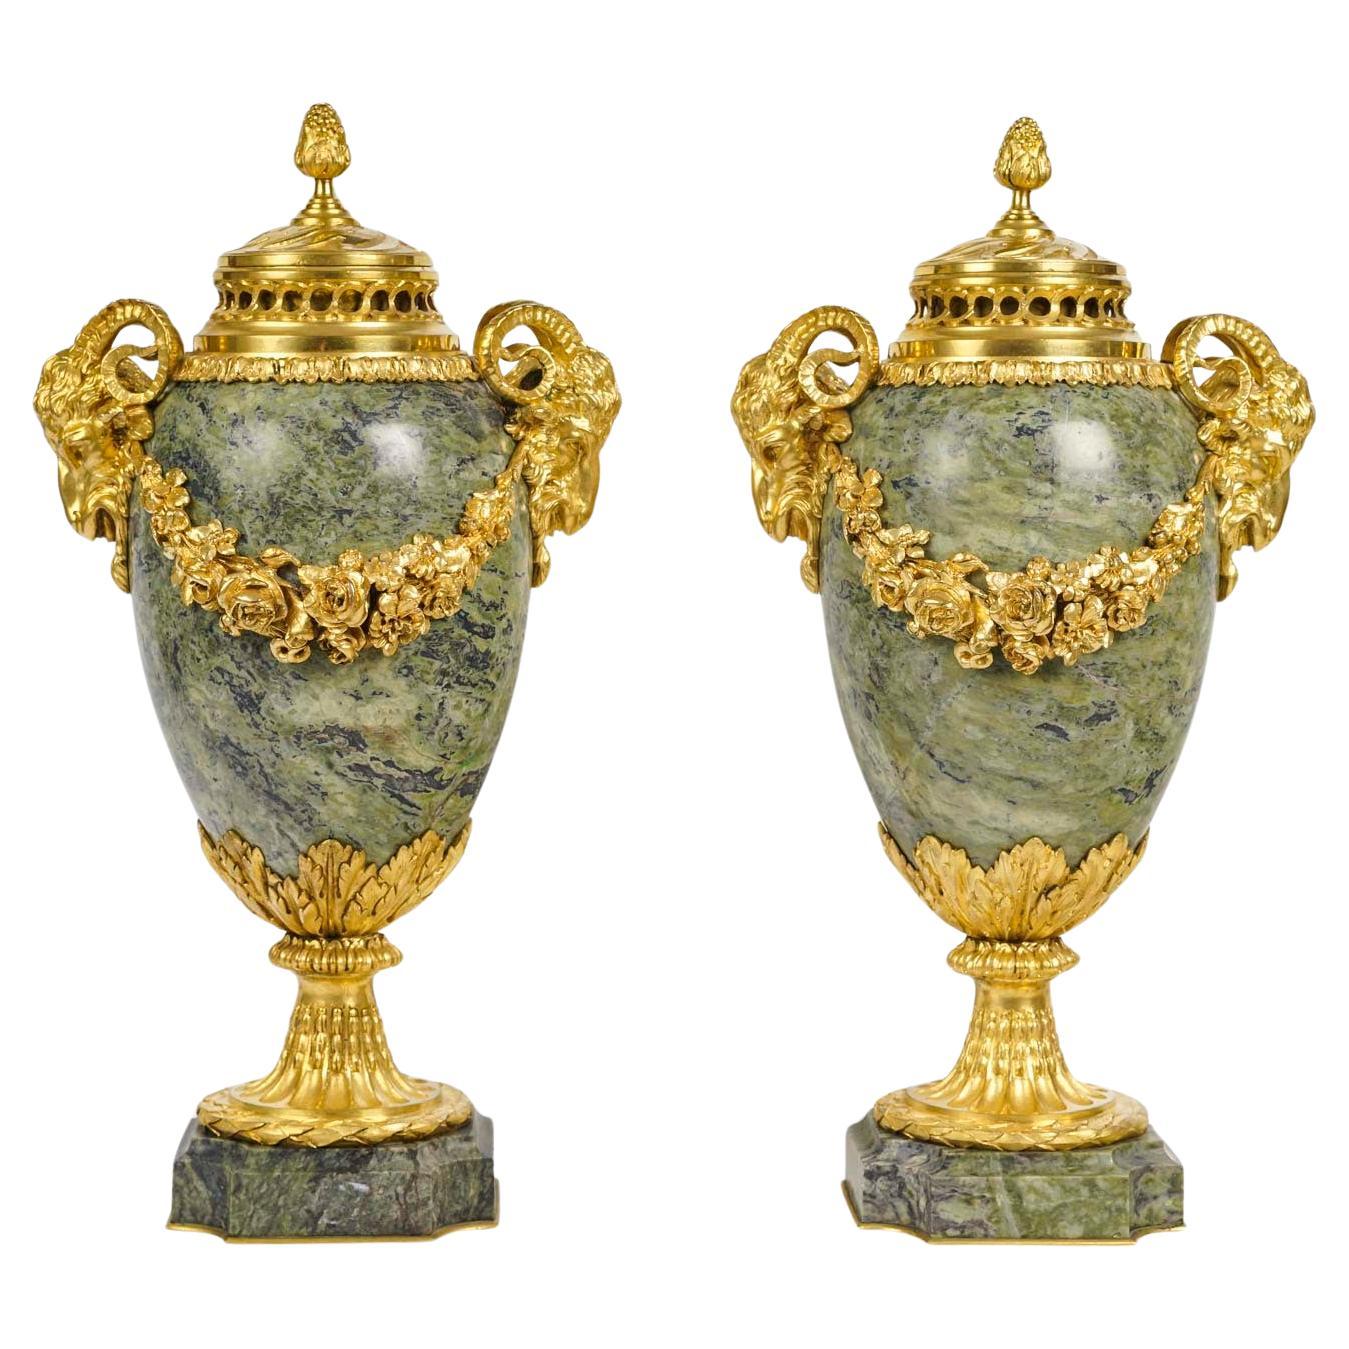 Pair of 19th Century Gilt Bronze and Marble Incense Burners.